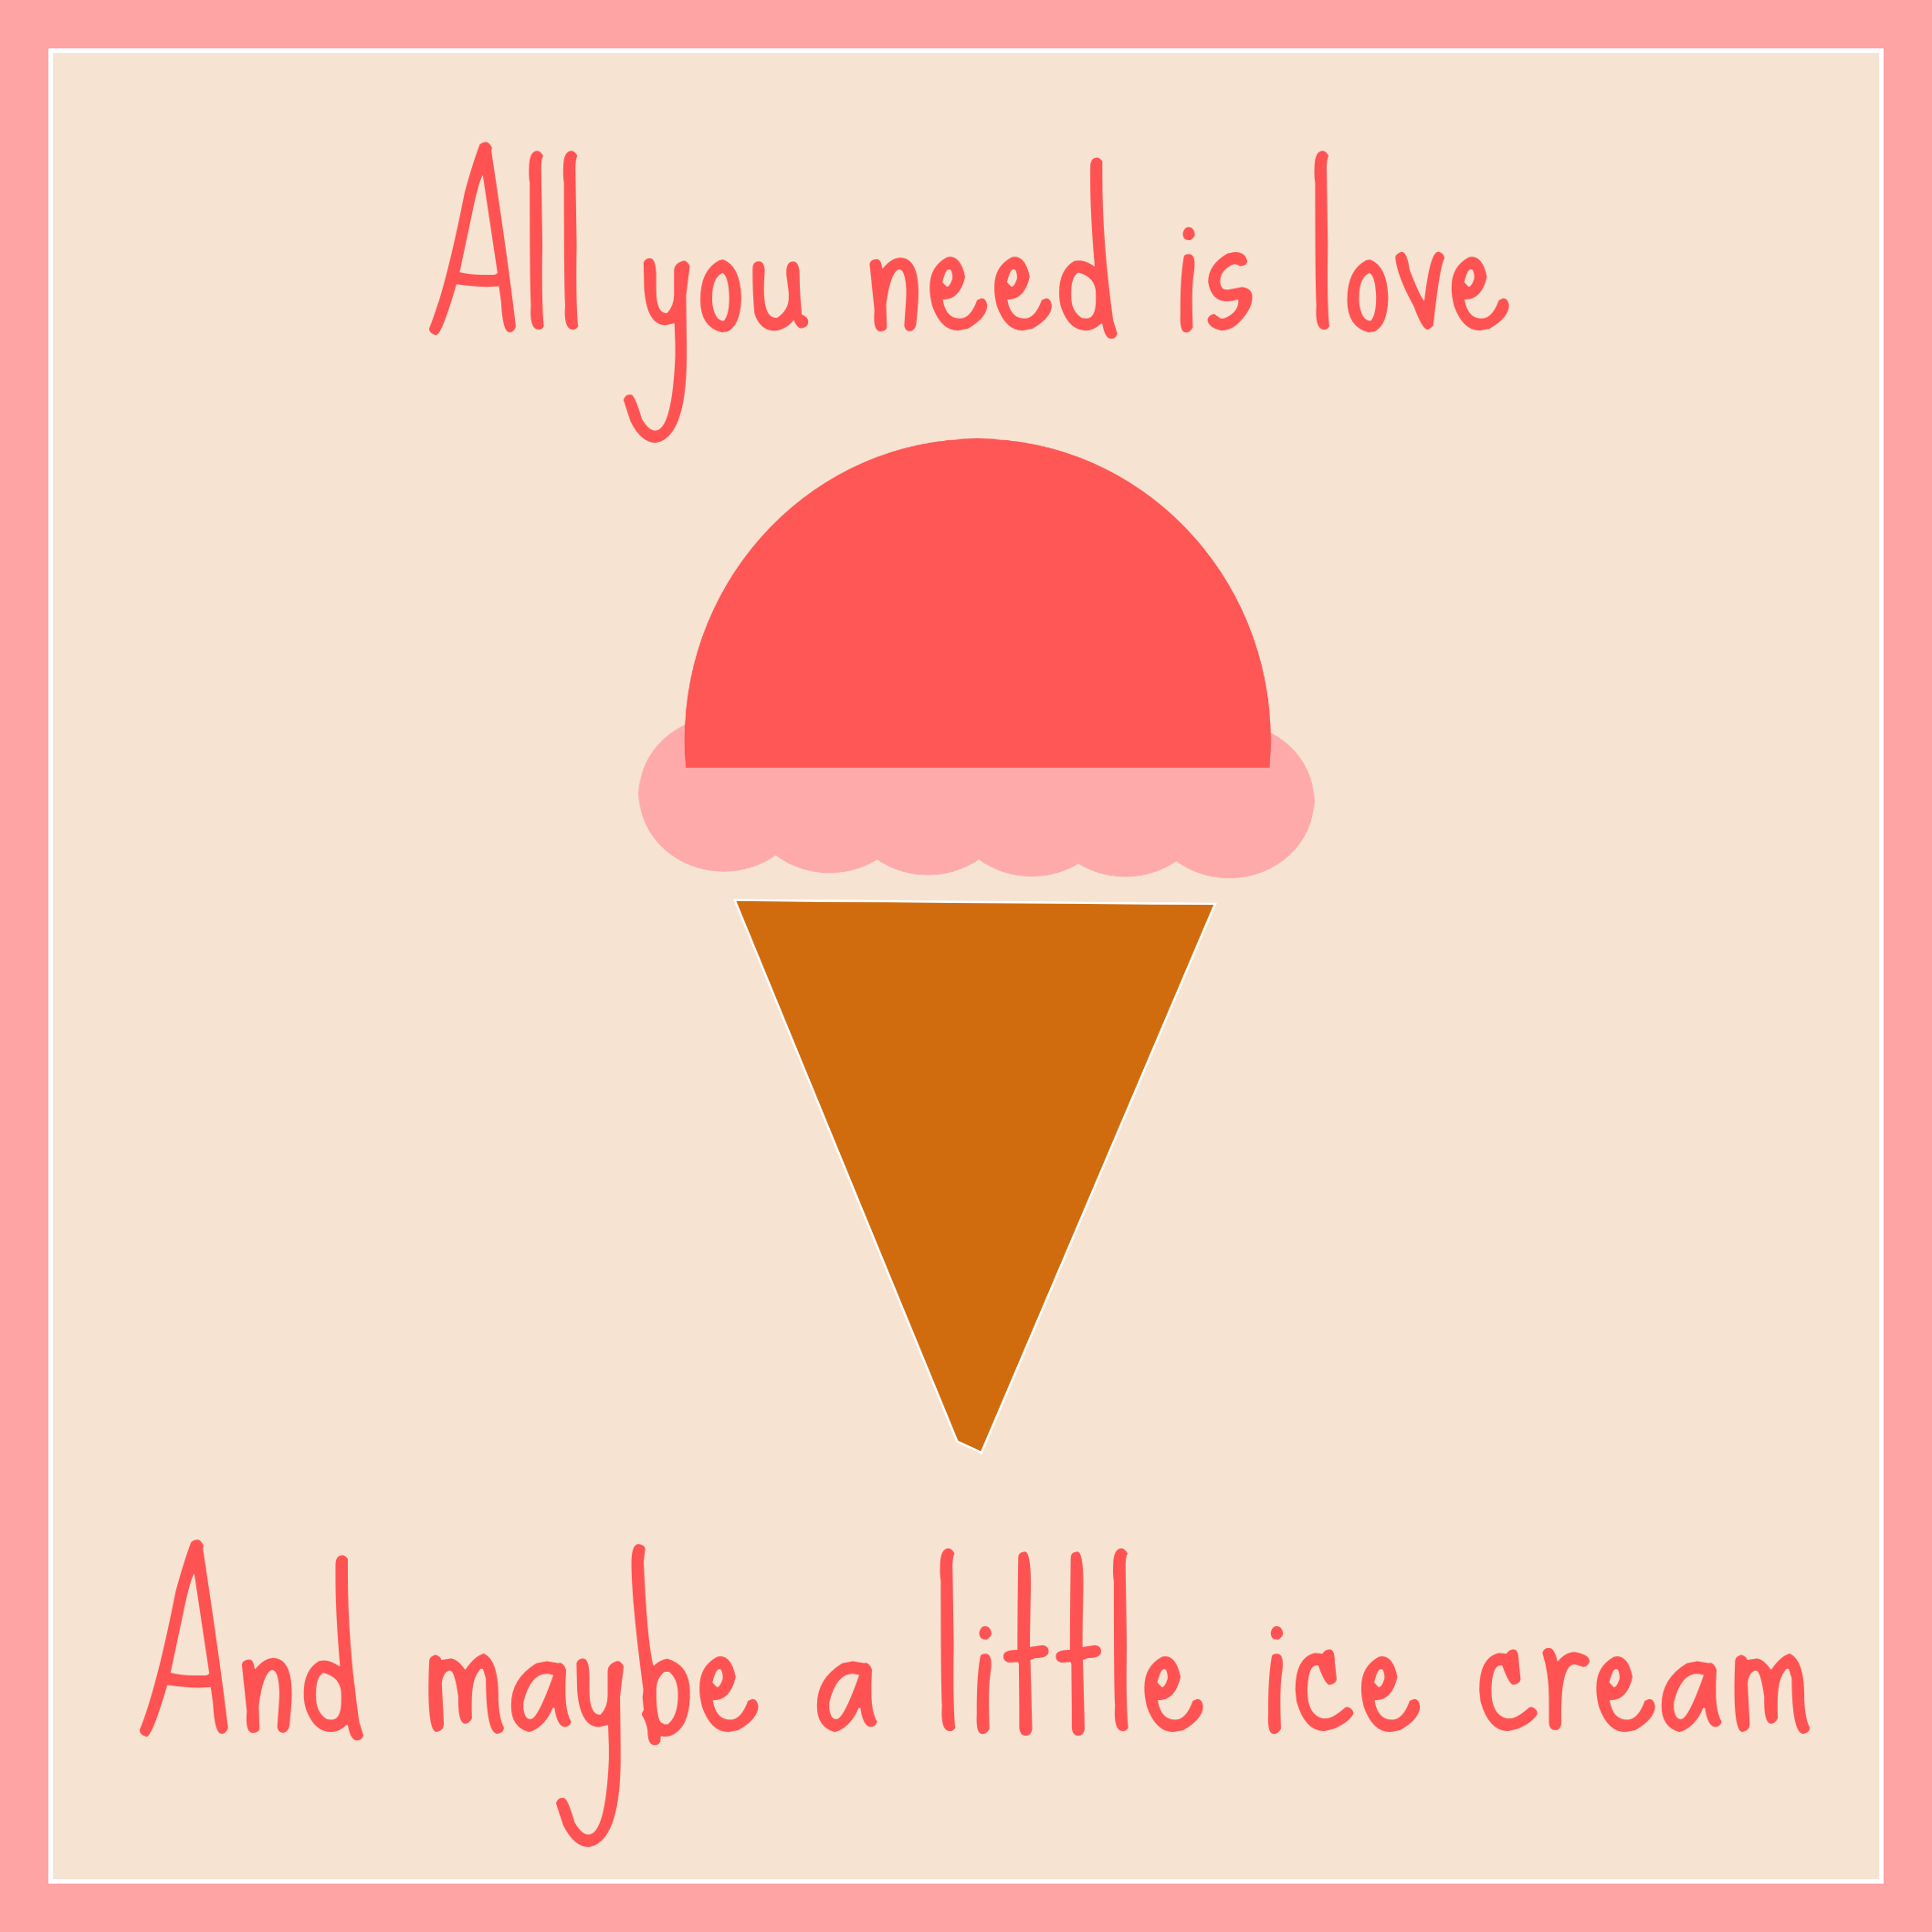 All you need is love, and maybe a little ice cream